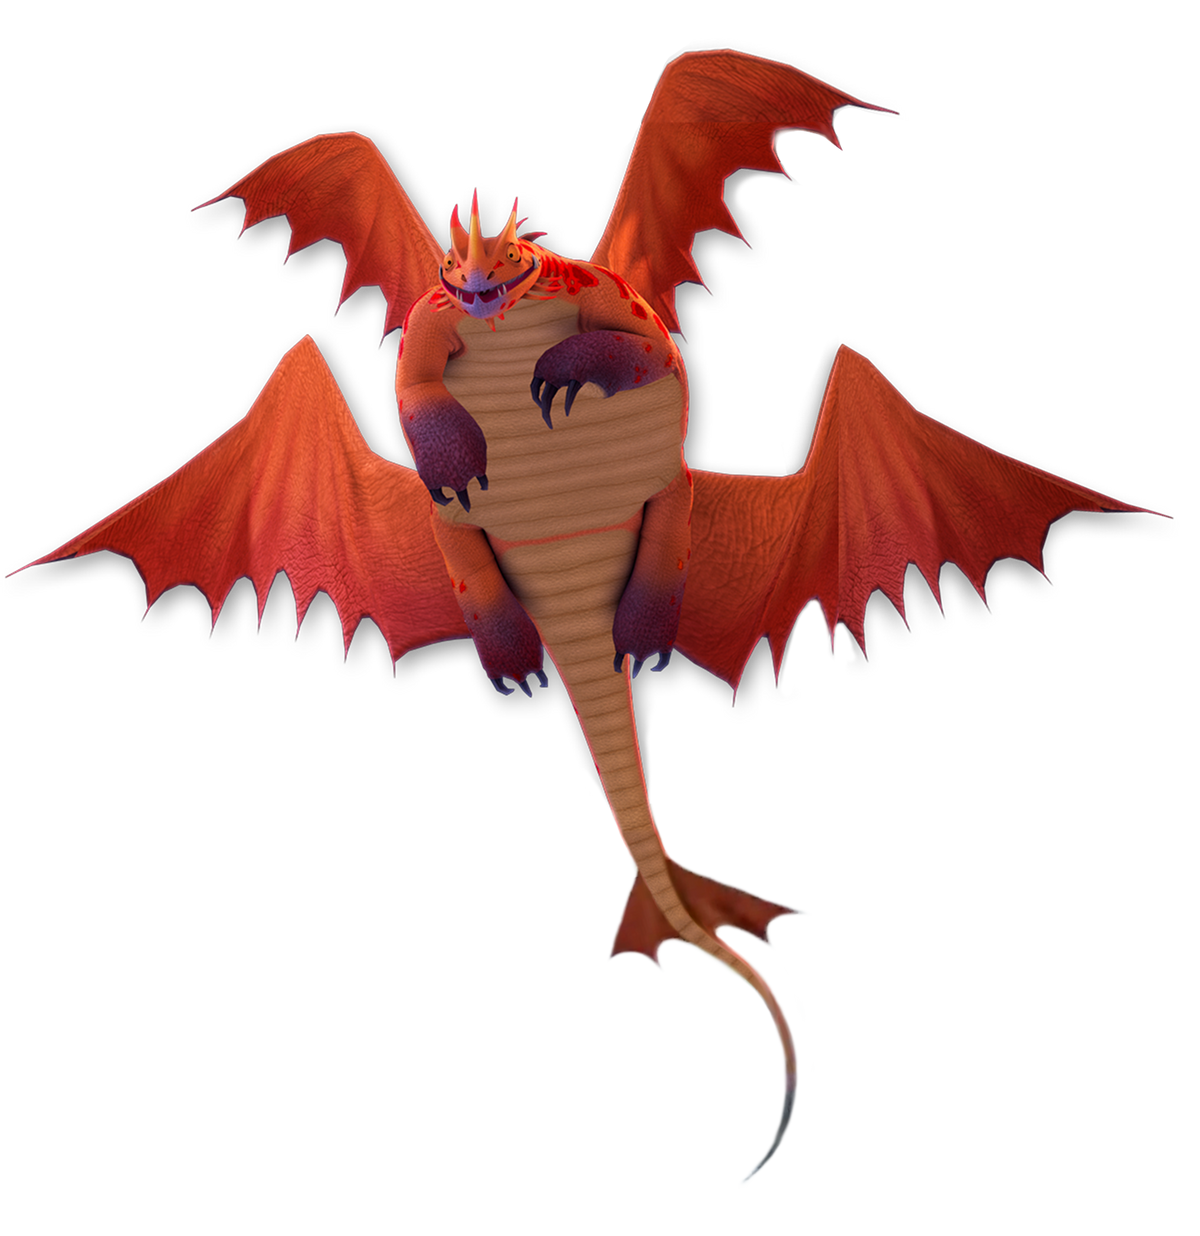 Dragons: Race to the Edge, How to Train Your Dragon Wiki